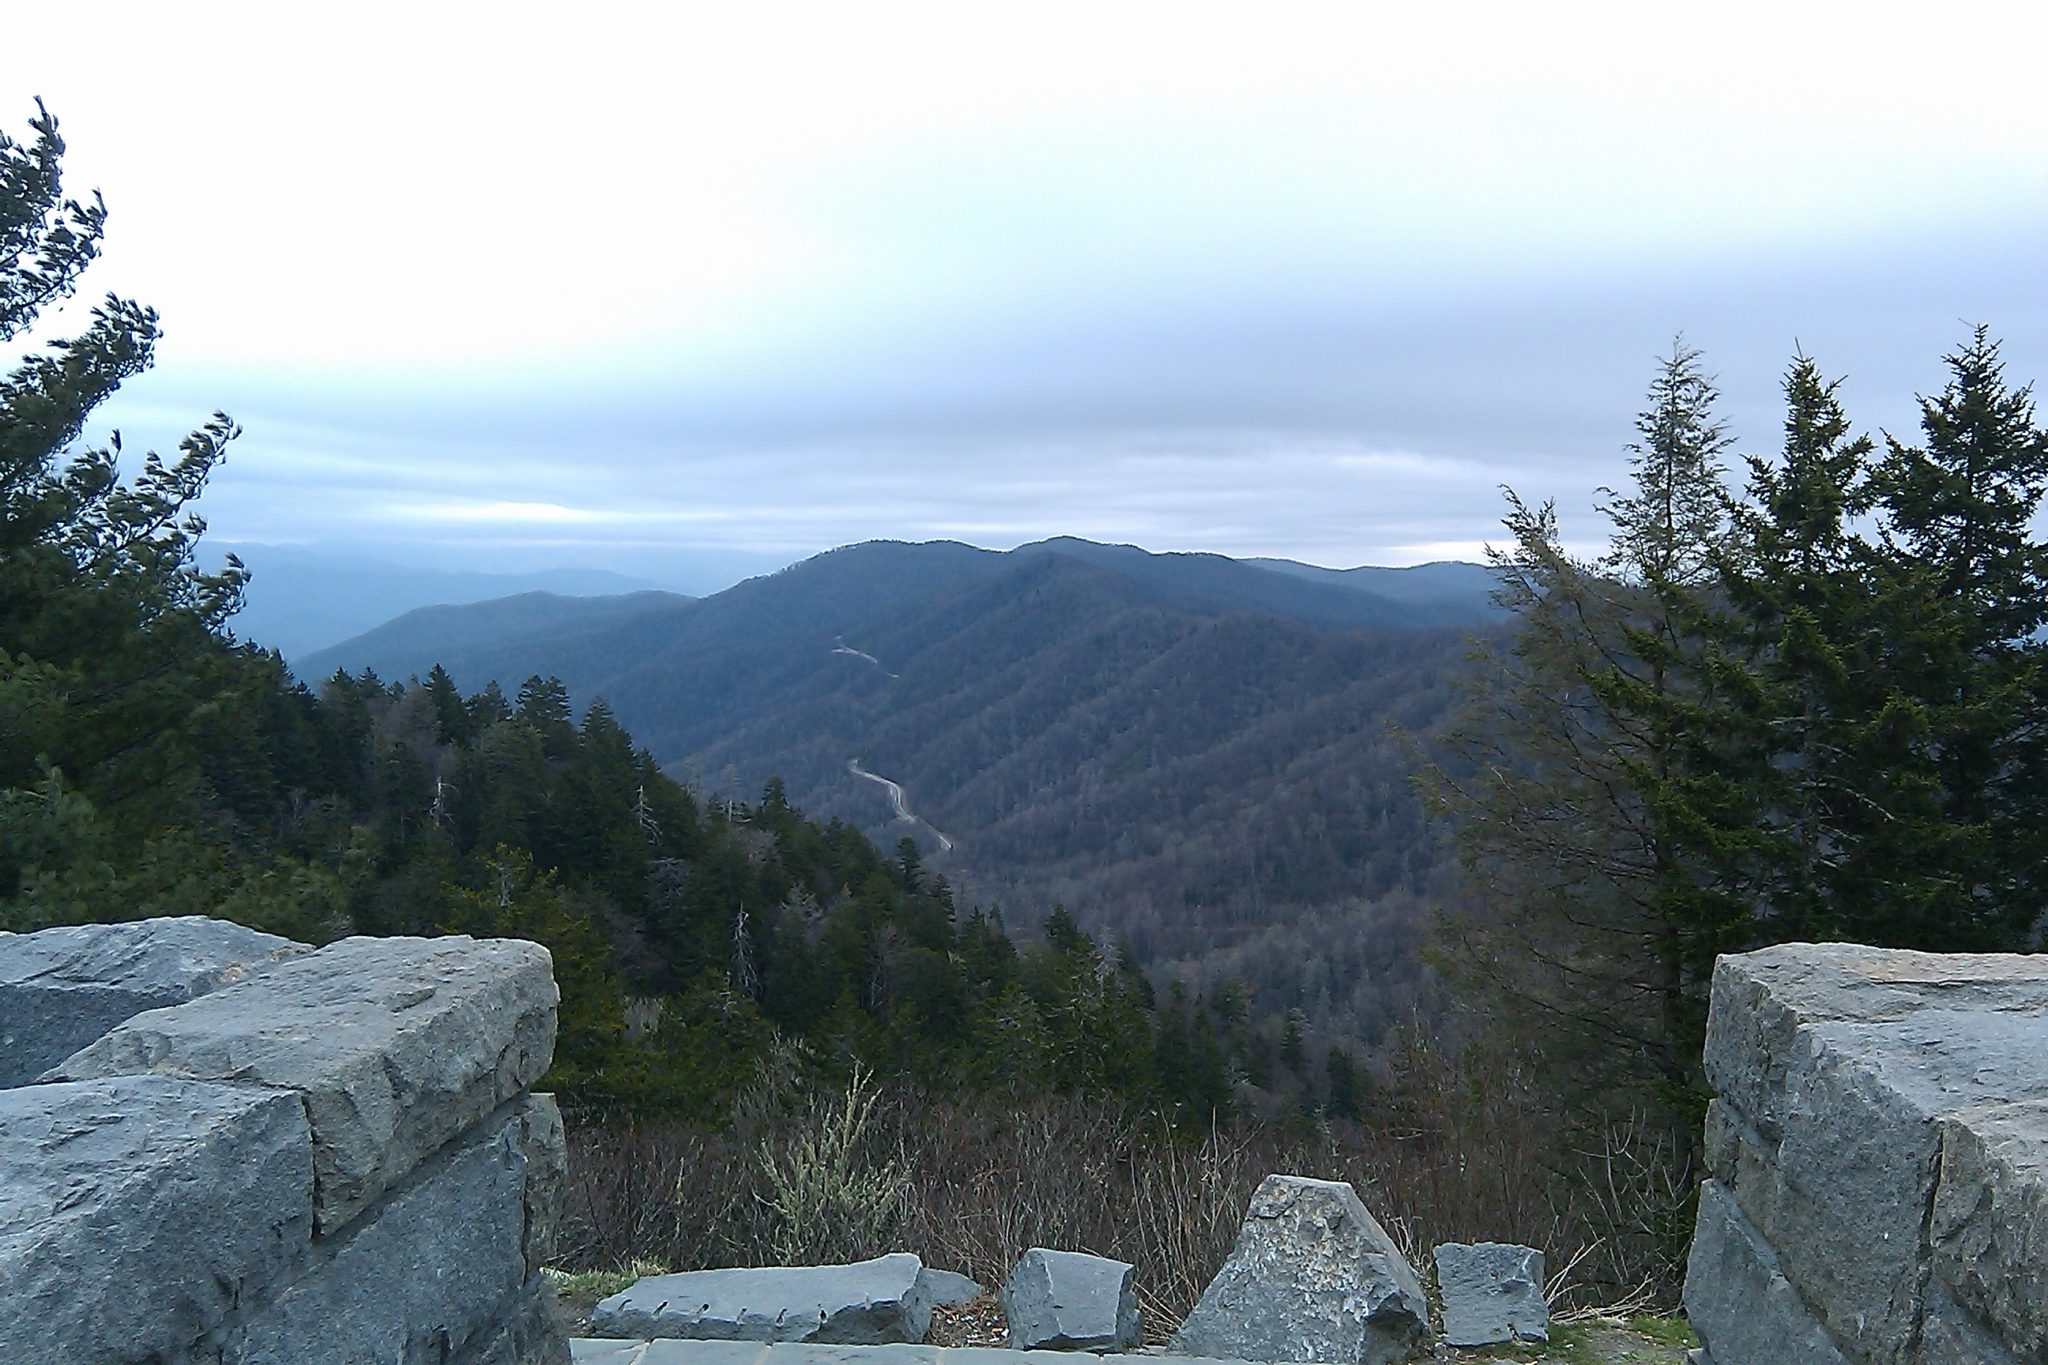 View from Clingman's Dome at Great Smoky Mountains National Park